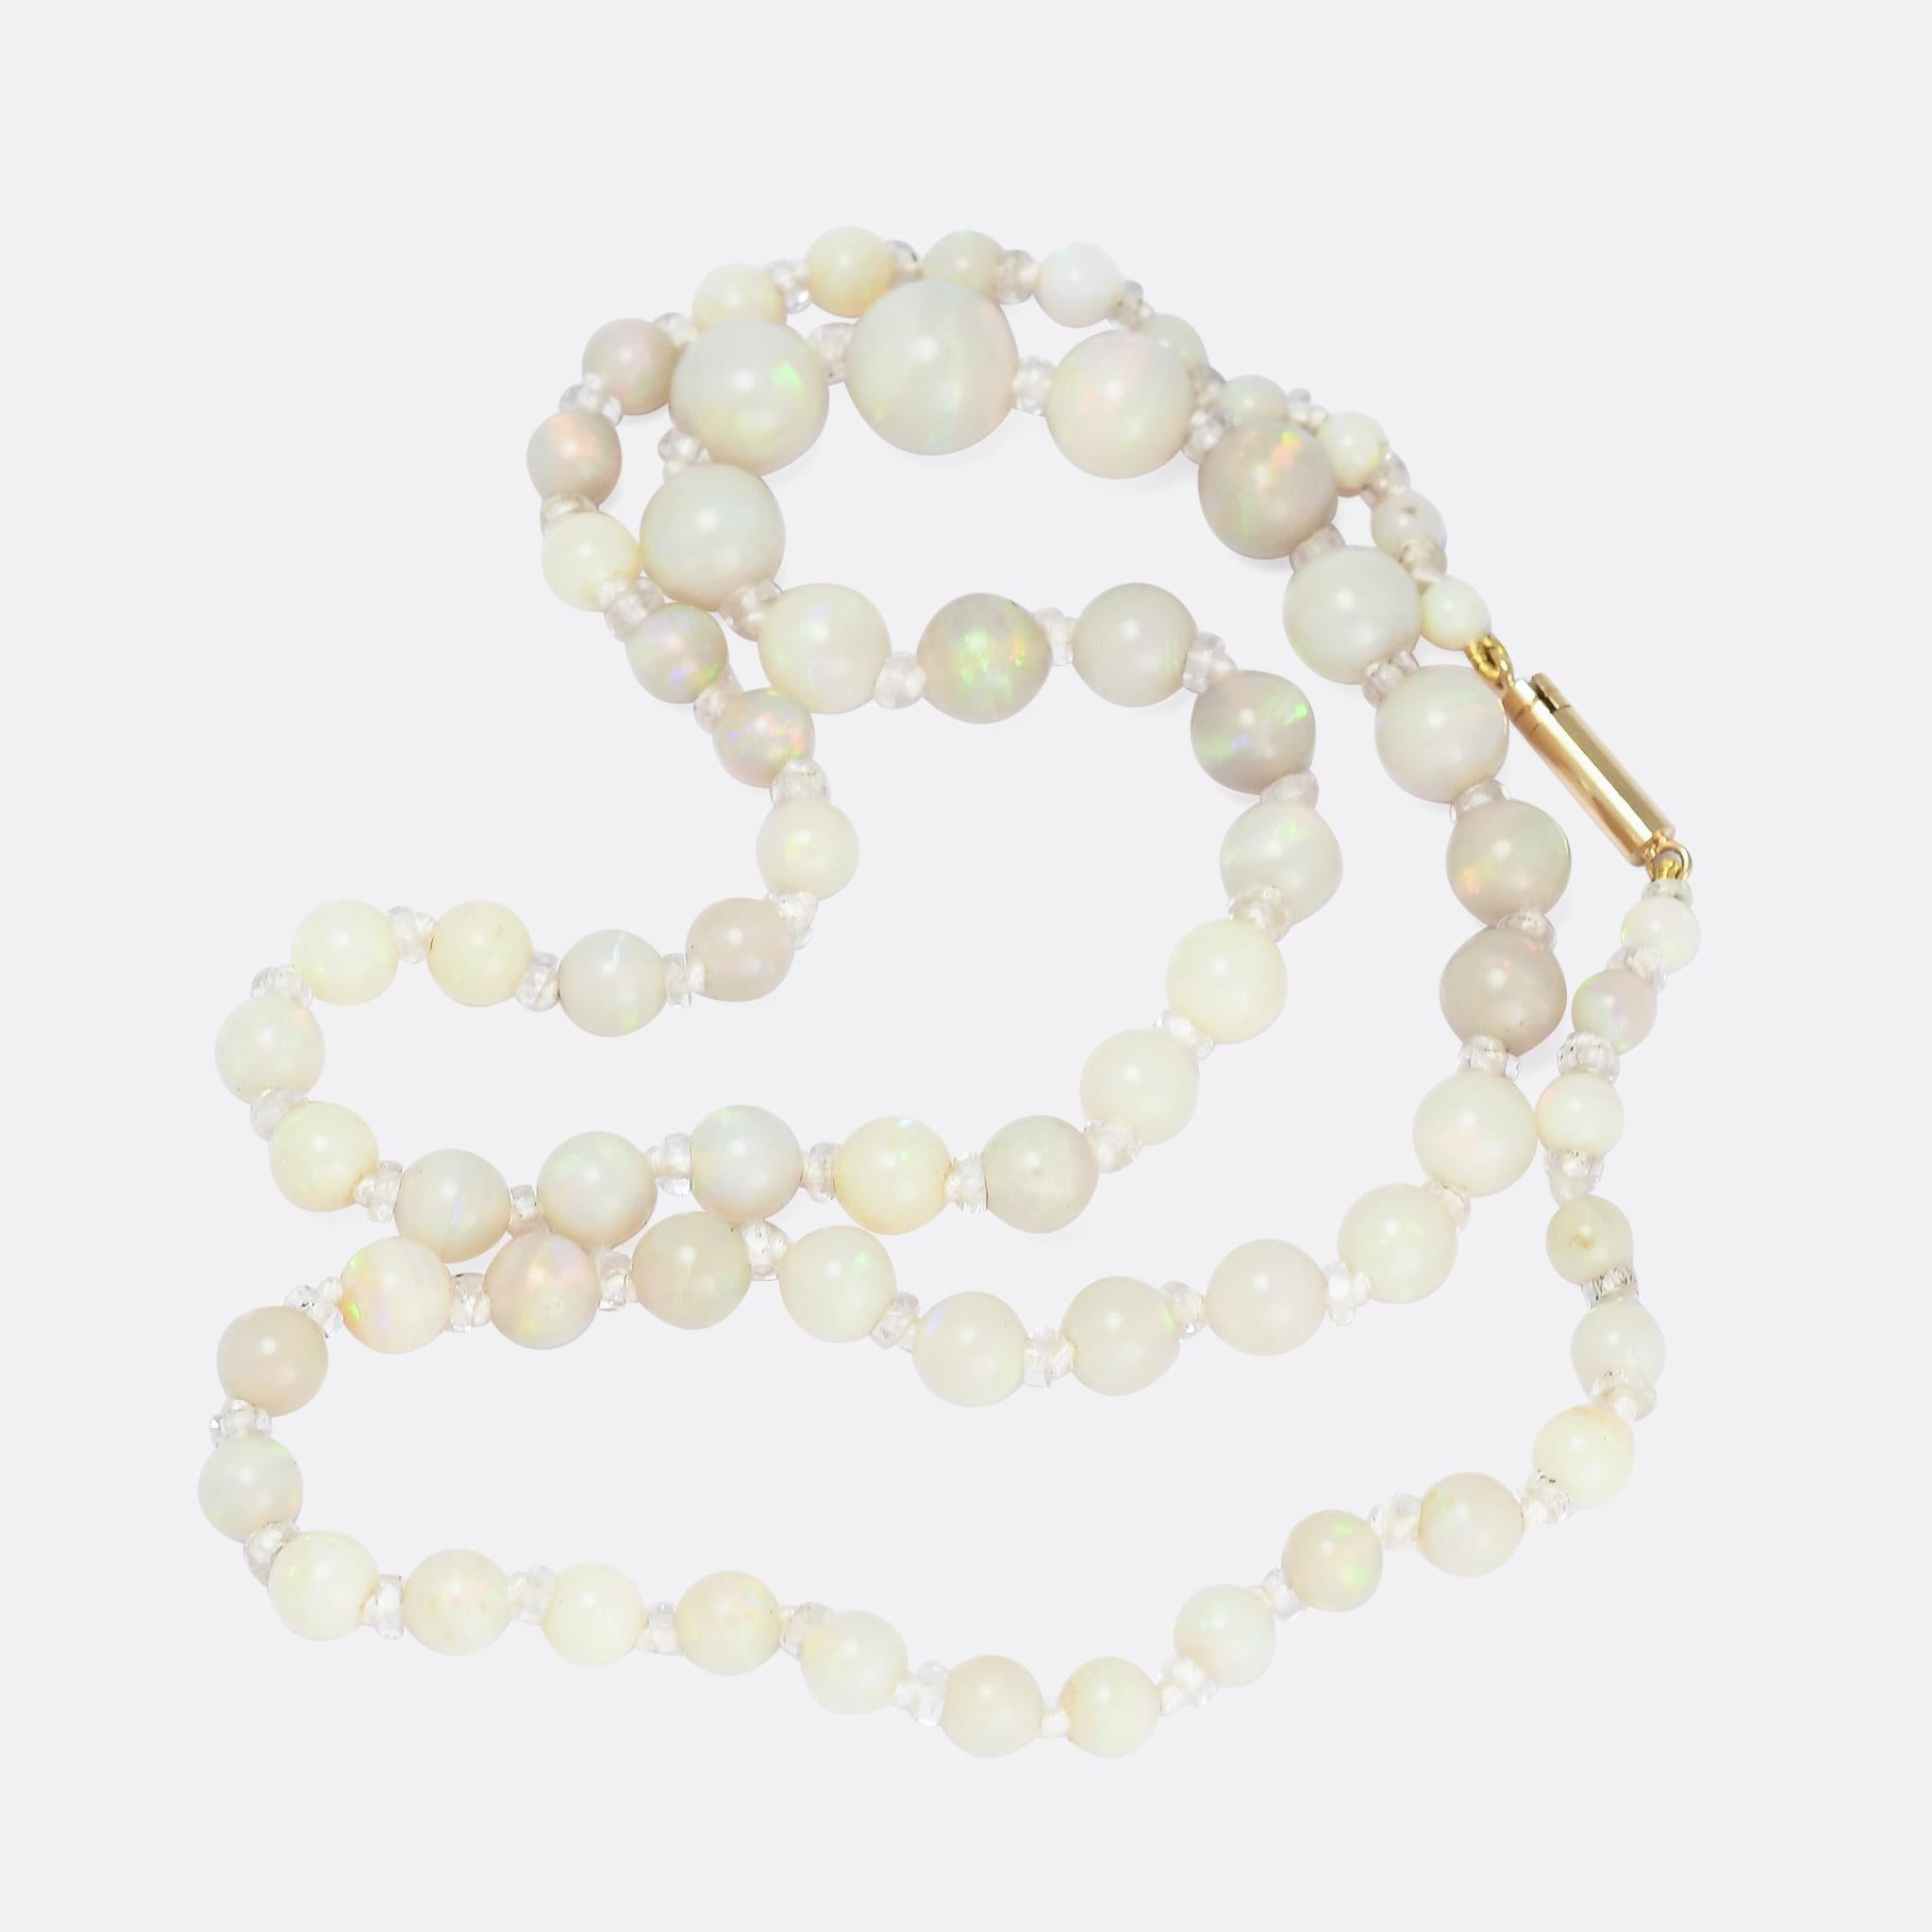 A gorgeous string of opal beads dating from the Art Deco period, circa 1920. The stones are graduated towards the middle, and display excellent flash and colour; they're strung with rock crystal dividers.

STONES 
Opal & Rock Crystal

MEASUREMENTS